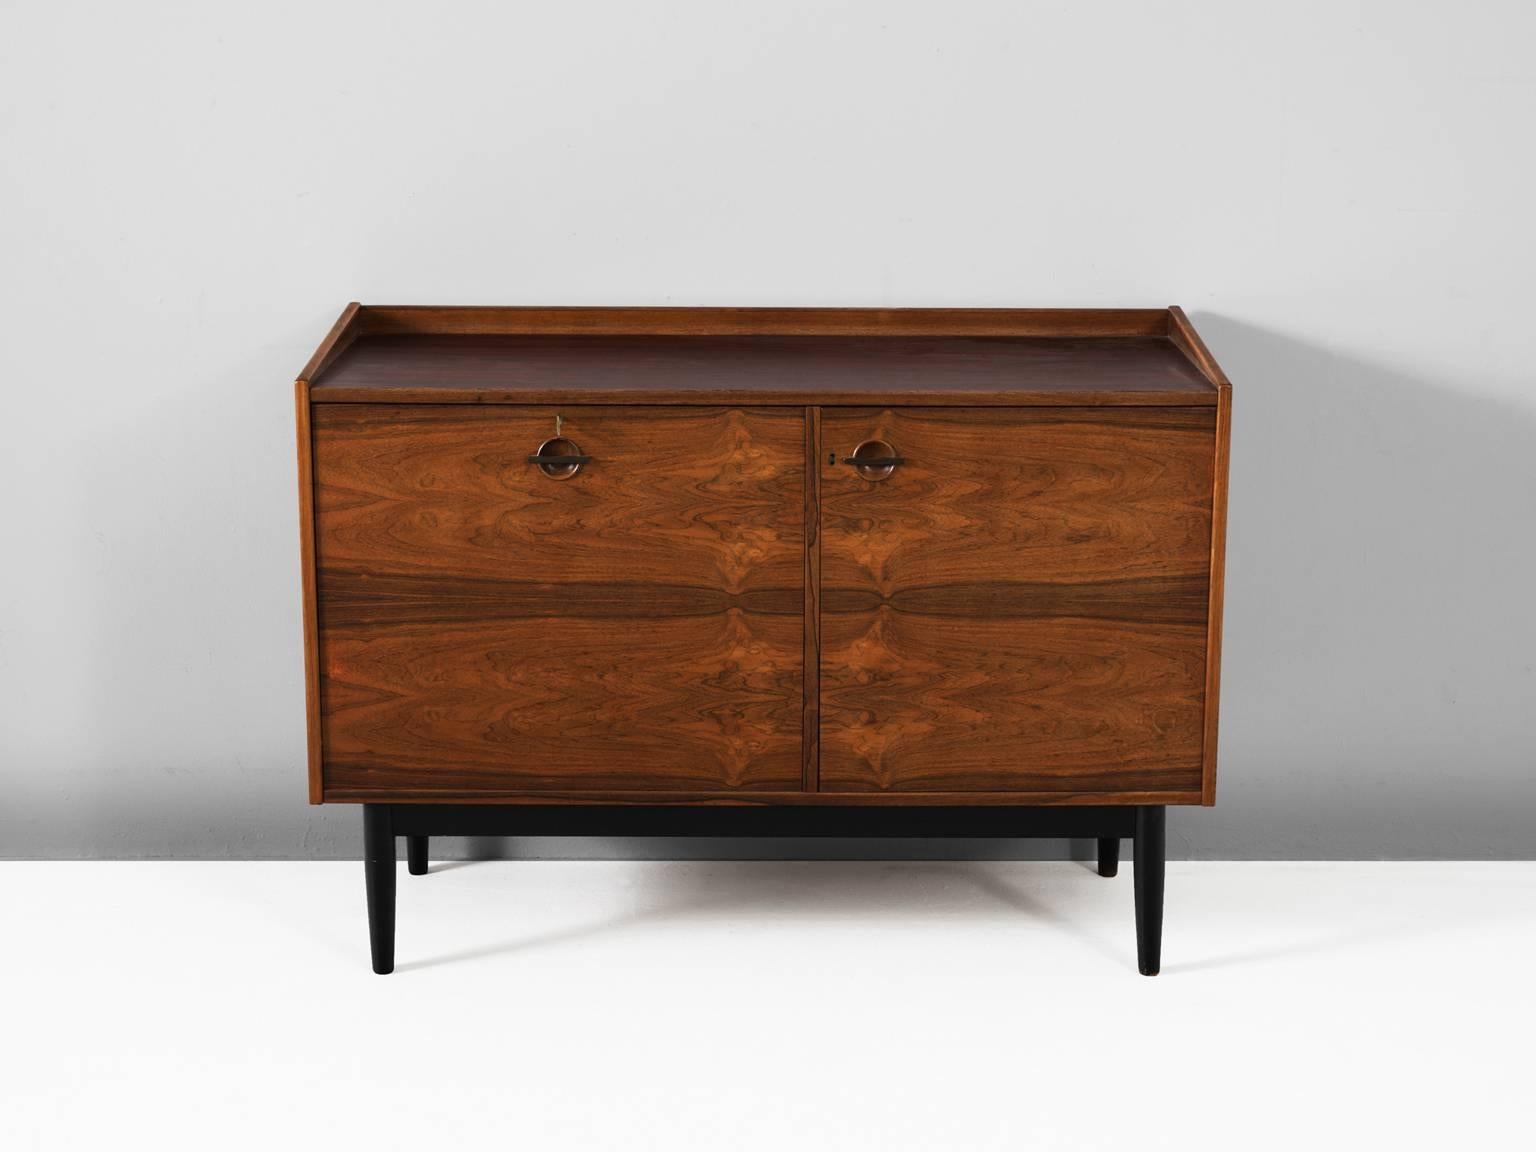 Bar cabinet, in rosewood and metal, by Hans Olsen for Brande Mobler, Denmark, 1960s.

A unique piece by designer Hans Olsen. This looks like a beautiful small sideboard, but once open versatile storage facilities will appear. The left side gives